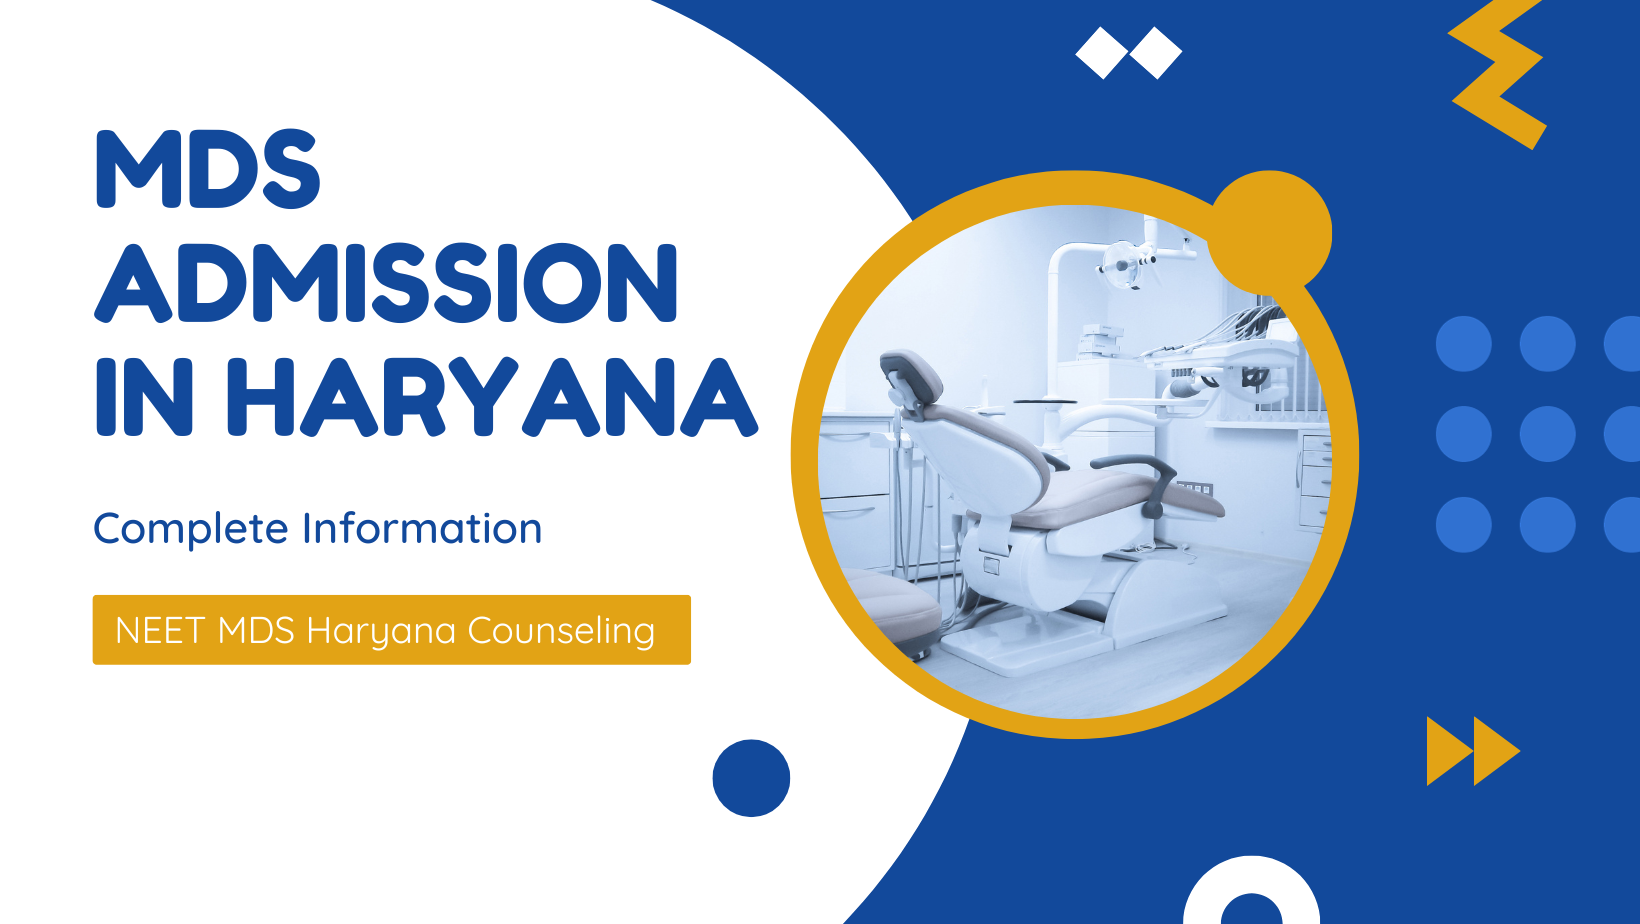 MDS Admission in Haryana through NEET MDS counseling